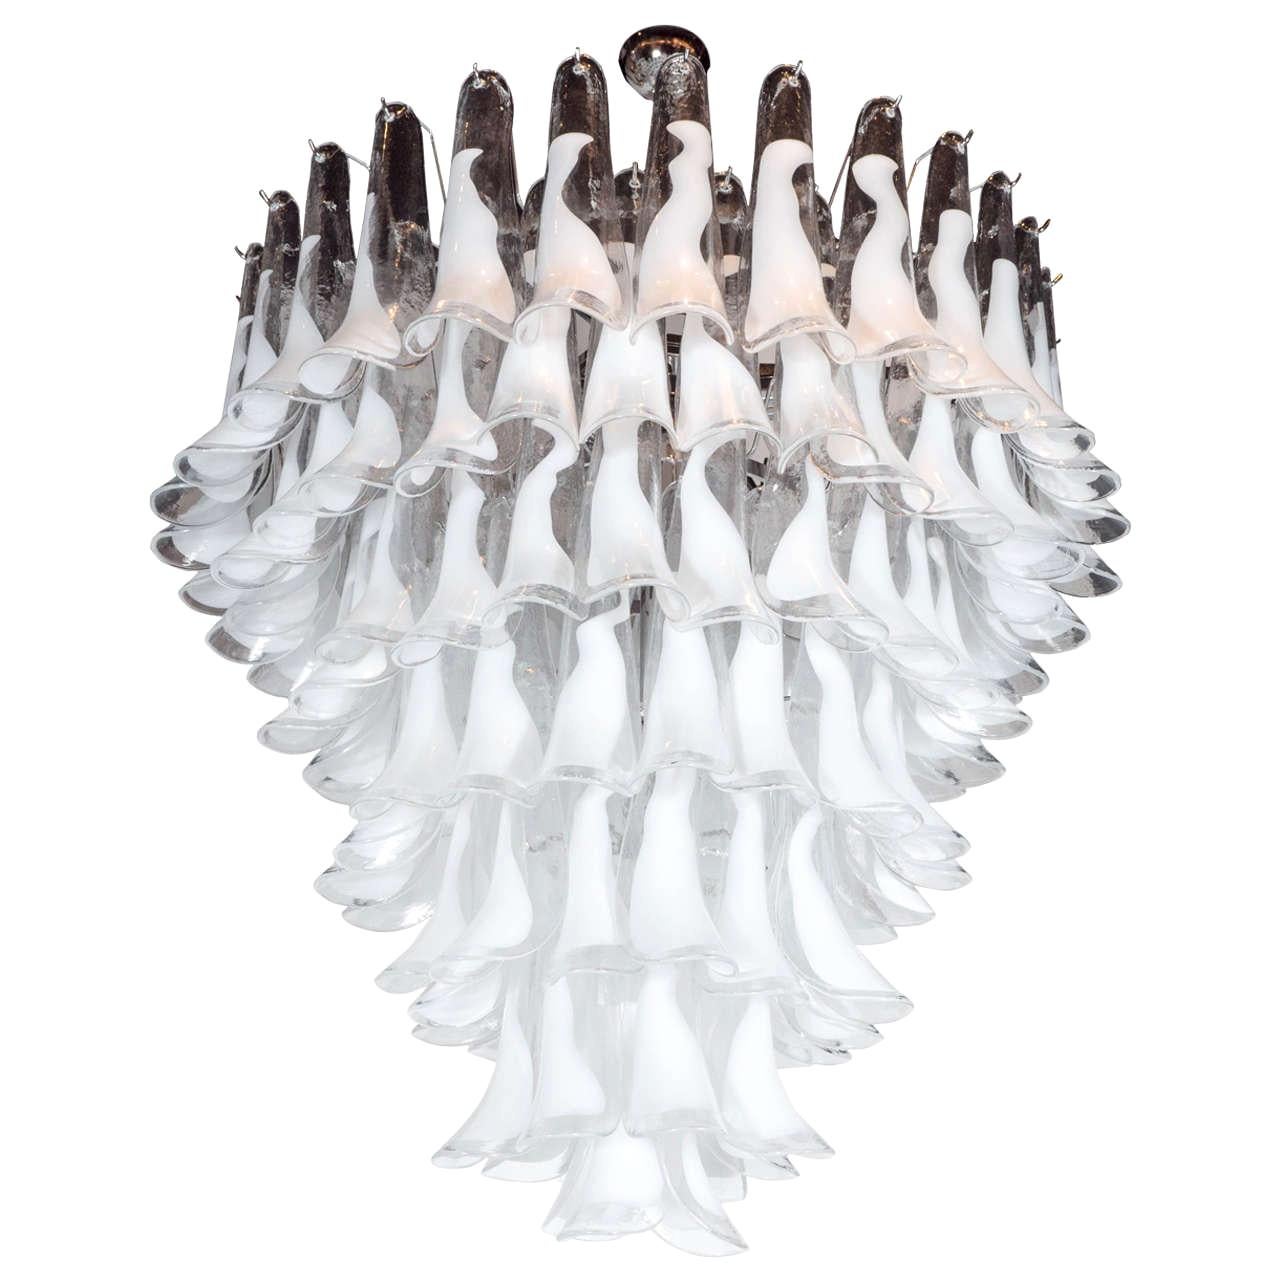 Modernist White and Translucent Handblown Murano Glass "Feather" Chandelier For Sale